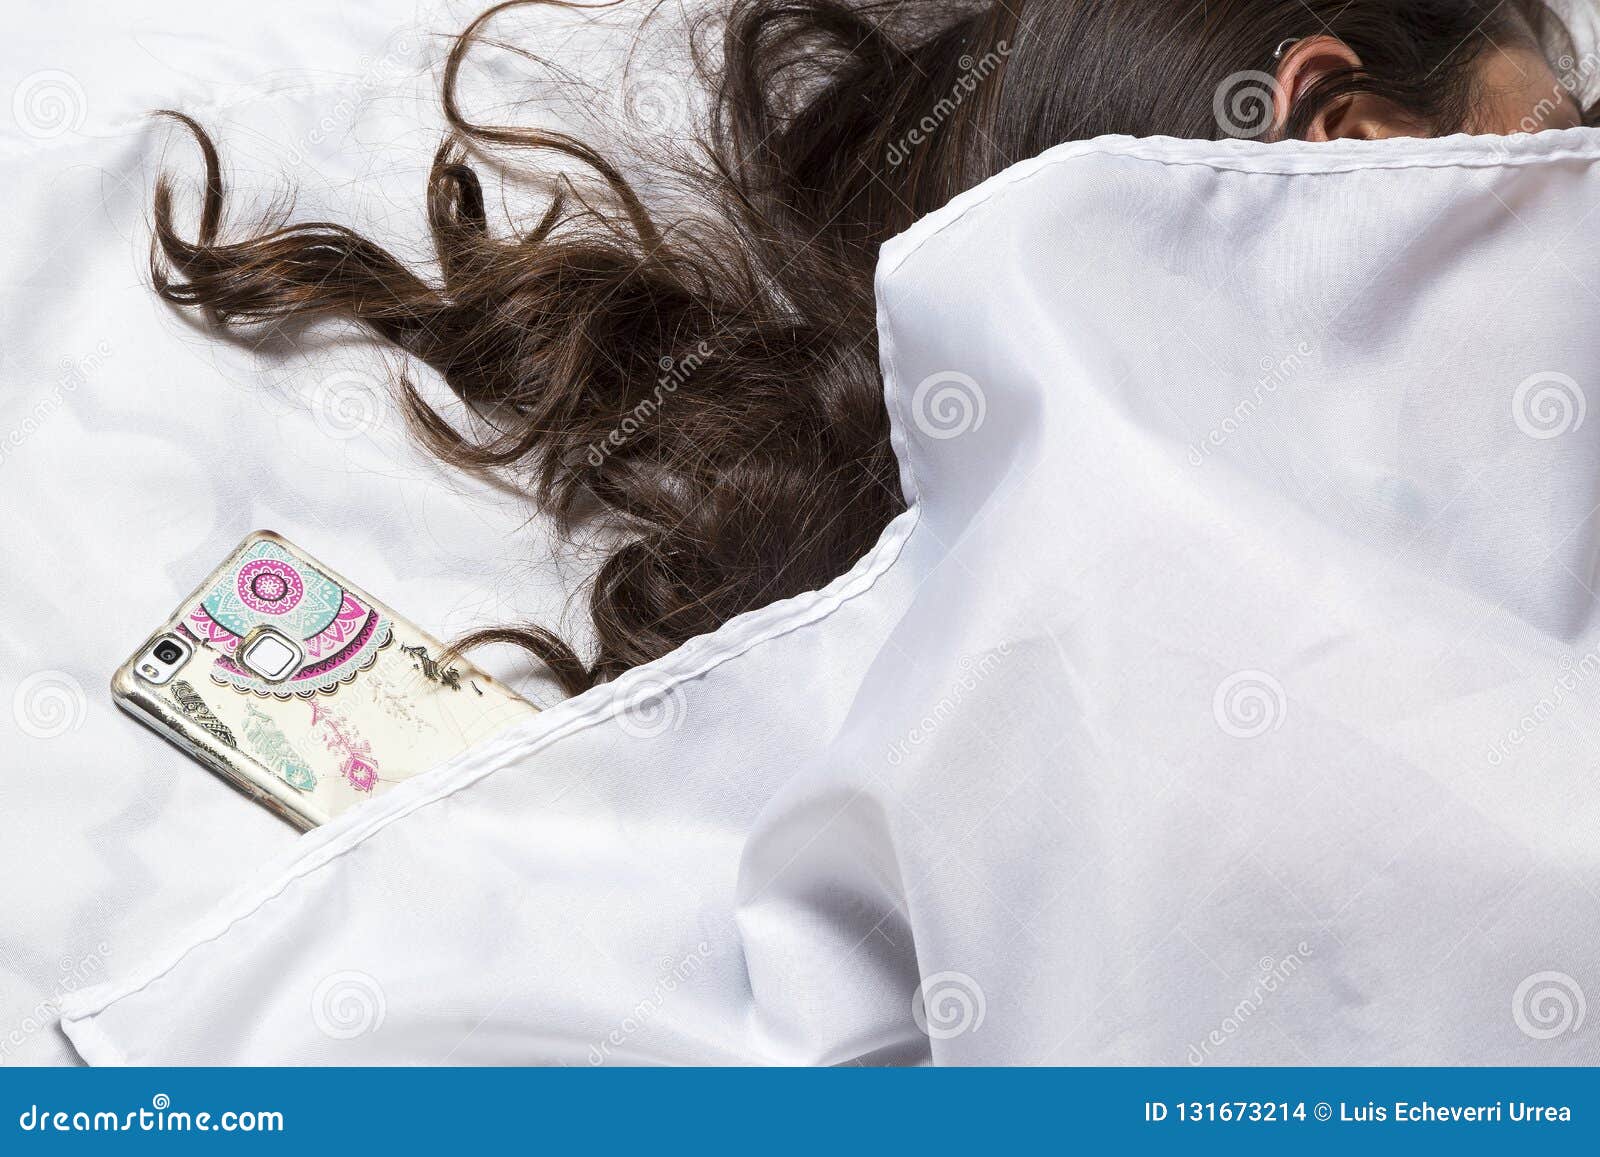 woman sleeping with phone in bed. latin woman